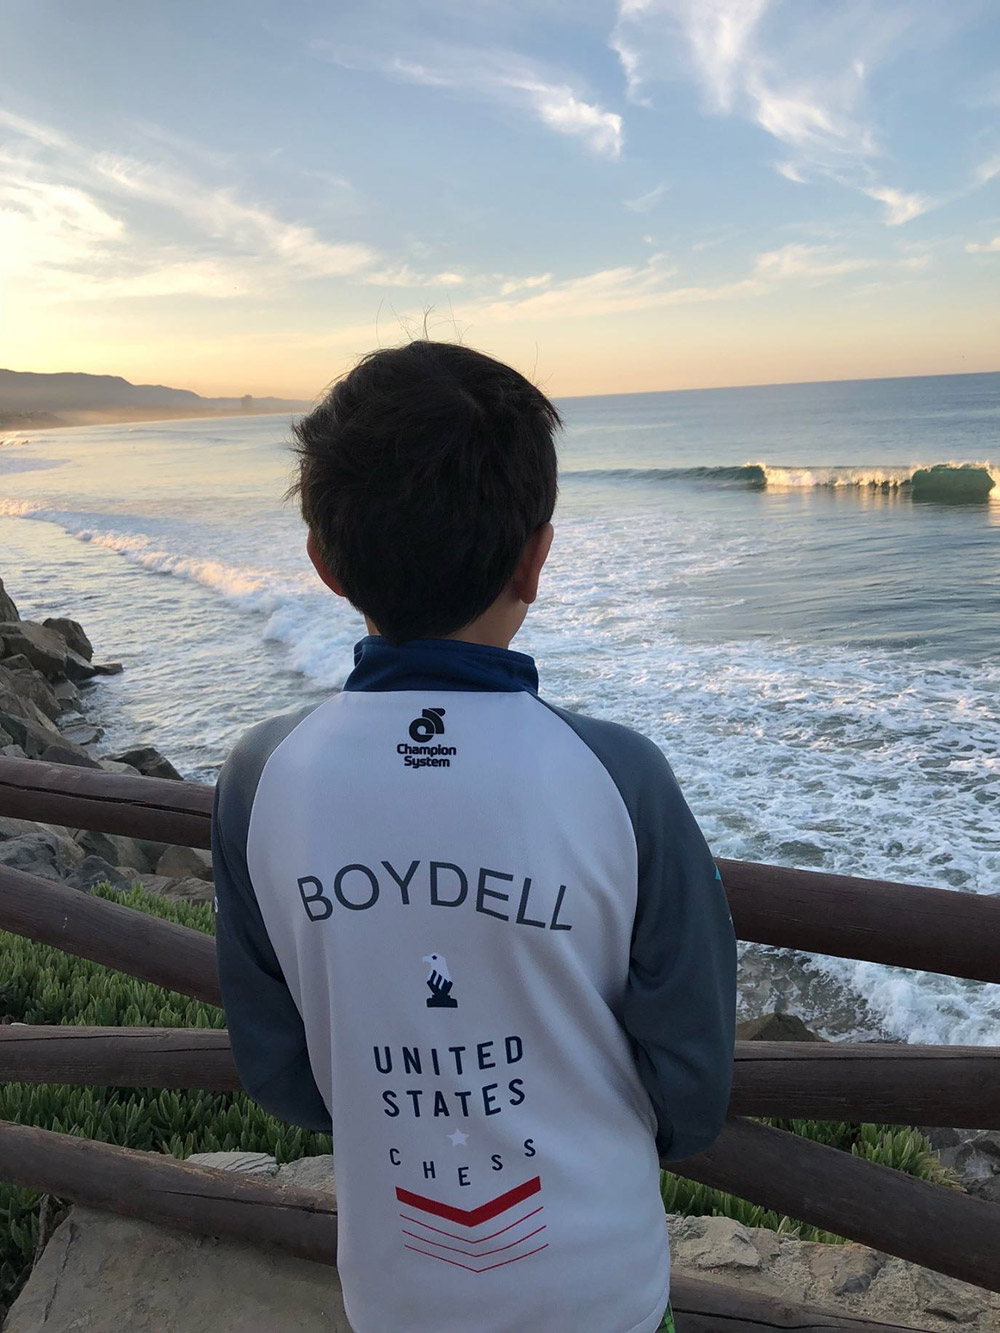 Oliver takes in the Pacific Ocean during a break from competition at the North American Youth Chess Championships in Mexico. November, 2018